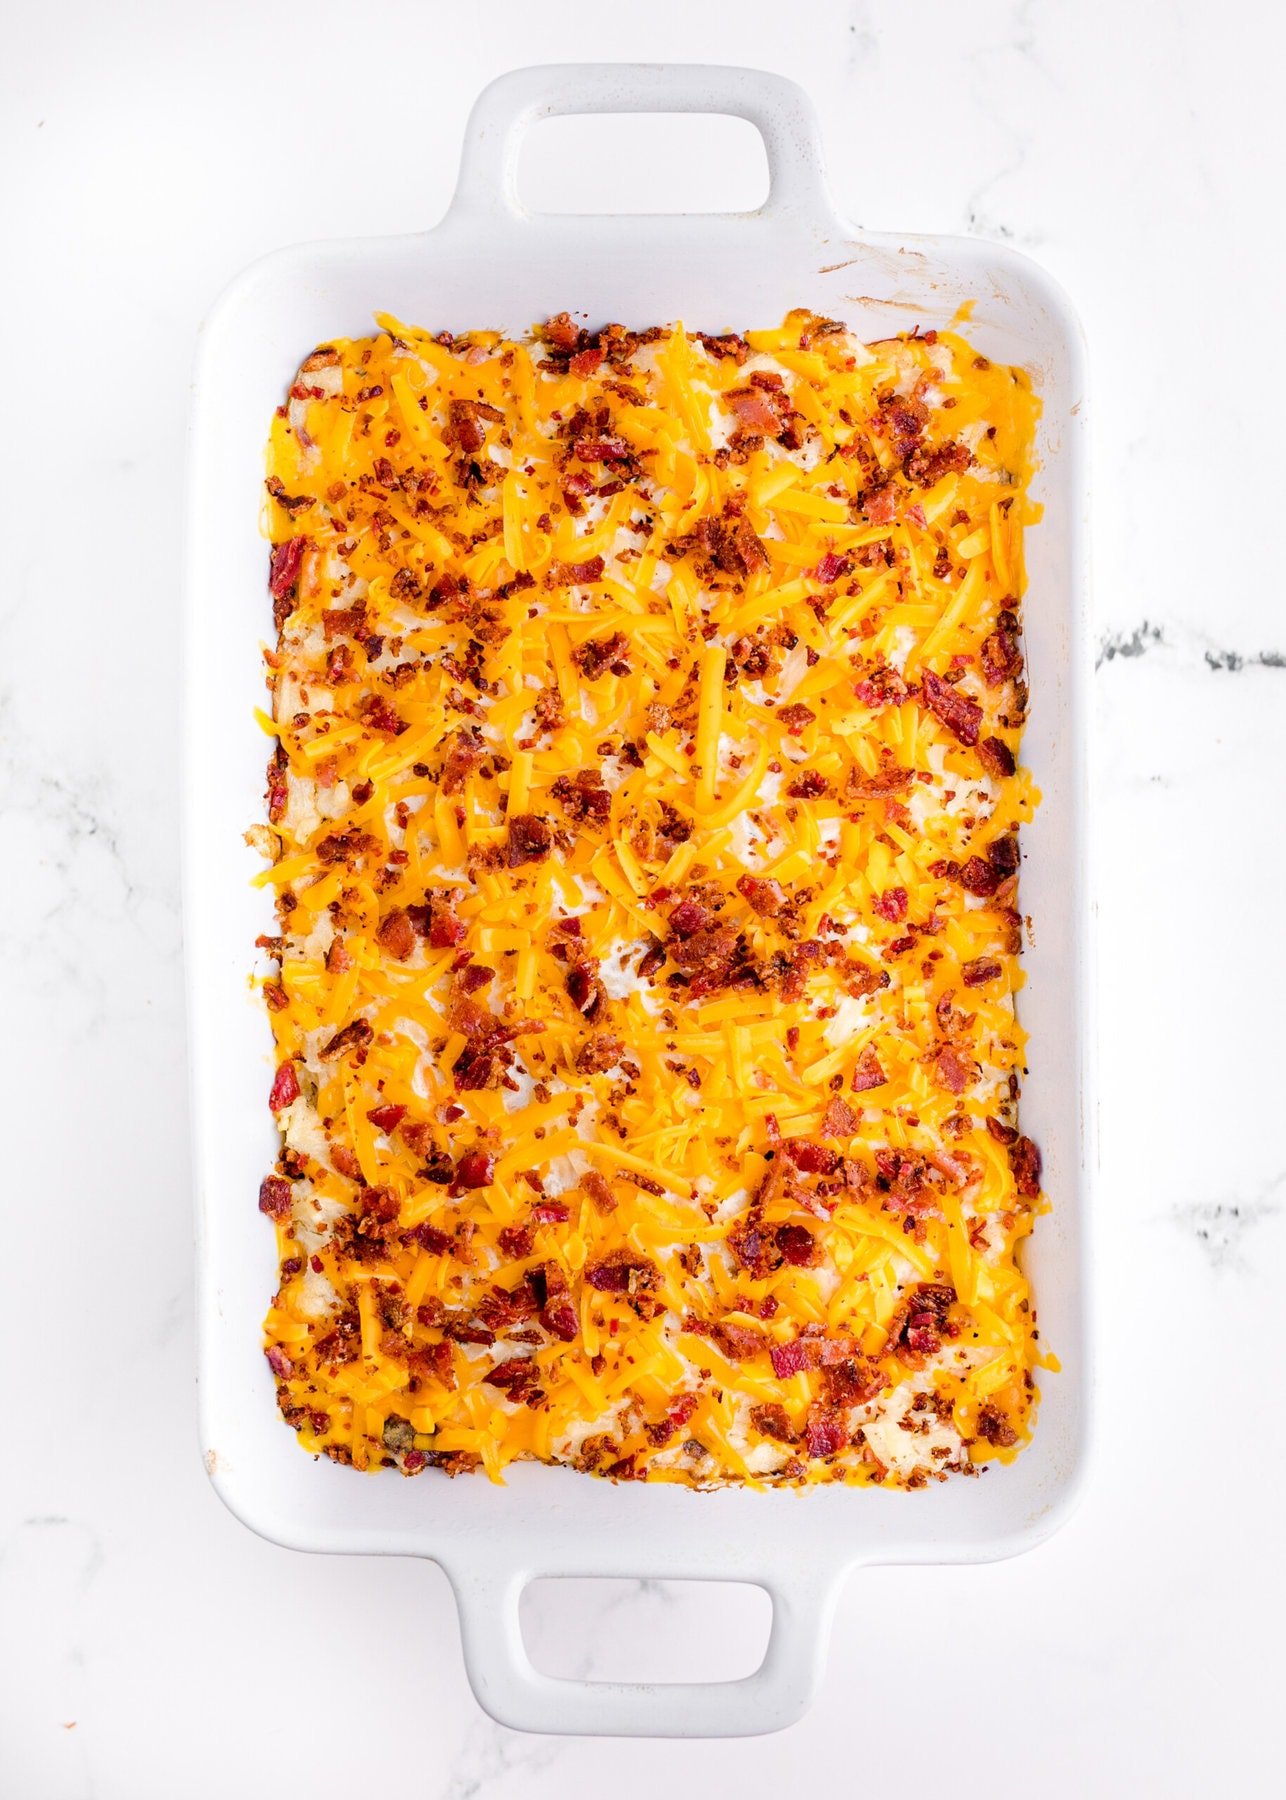 Putting the bacon and cheese on the Loaded Potato Casserole.